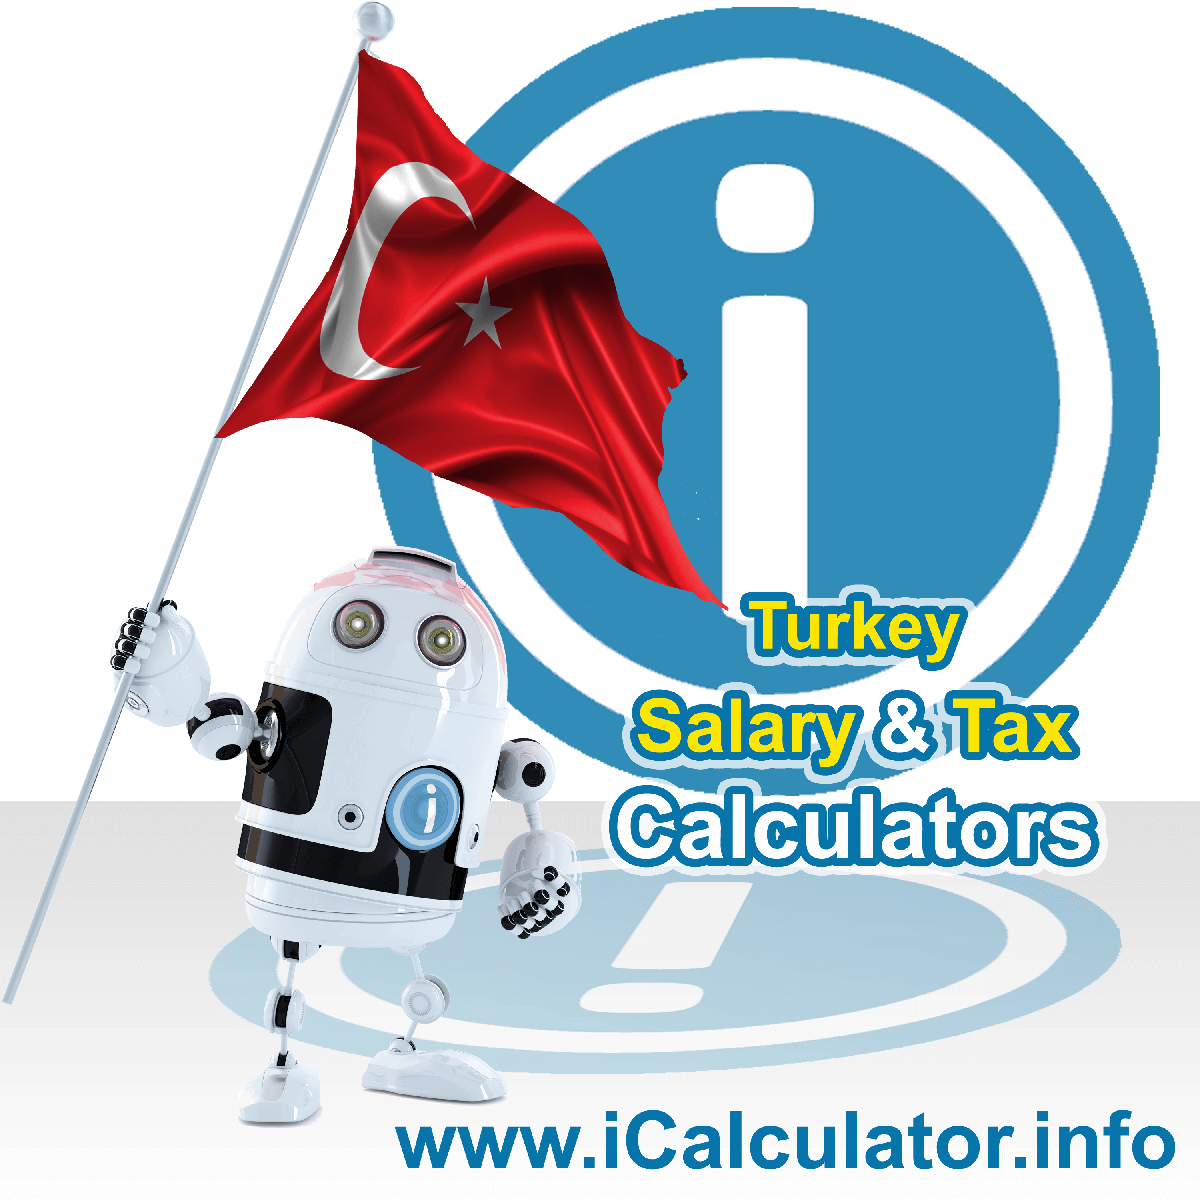 Turkey Tax Calculator. This image shows the Turkey flag and information relating to the tax formula for the Turkey Salary Calculator